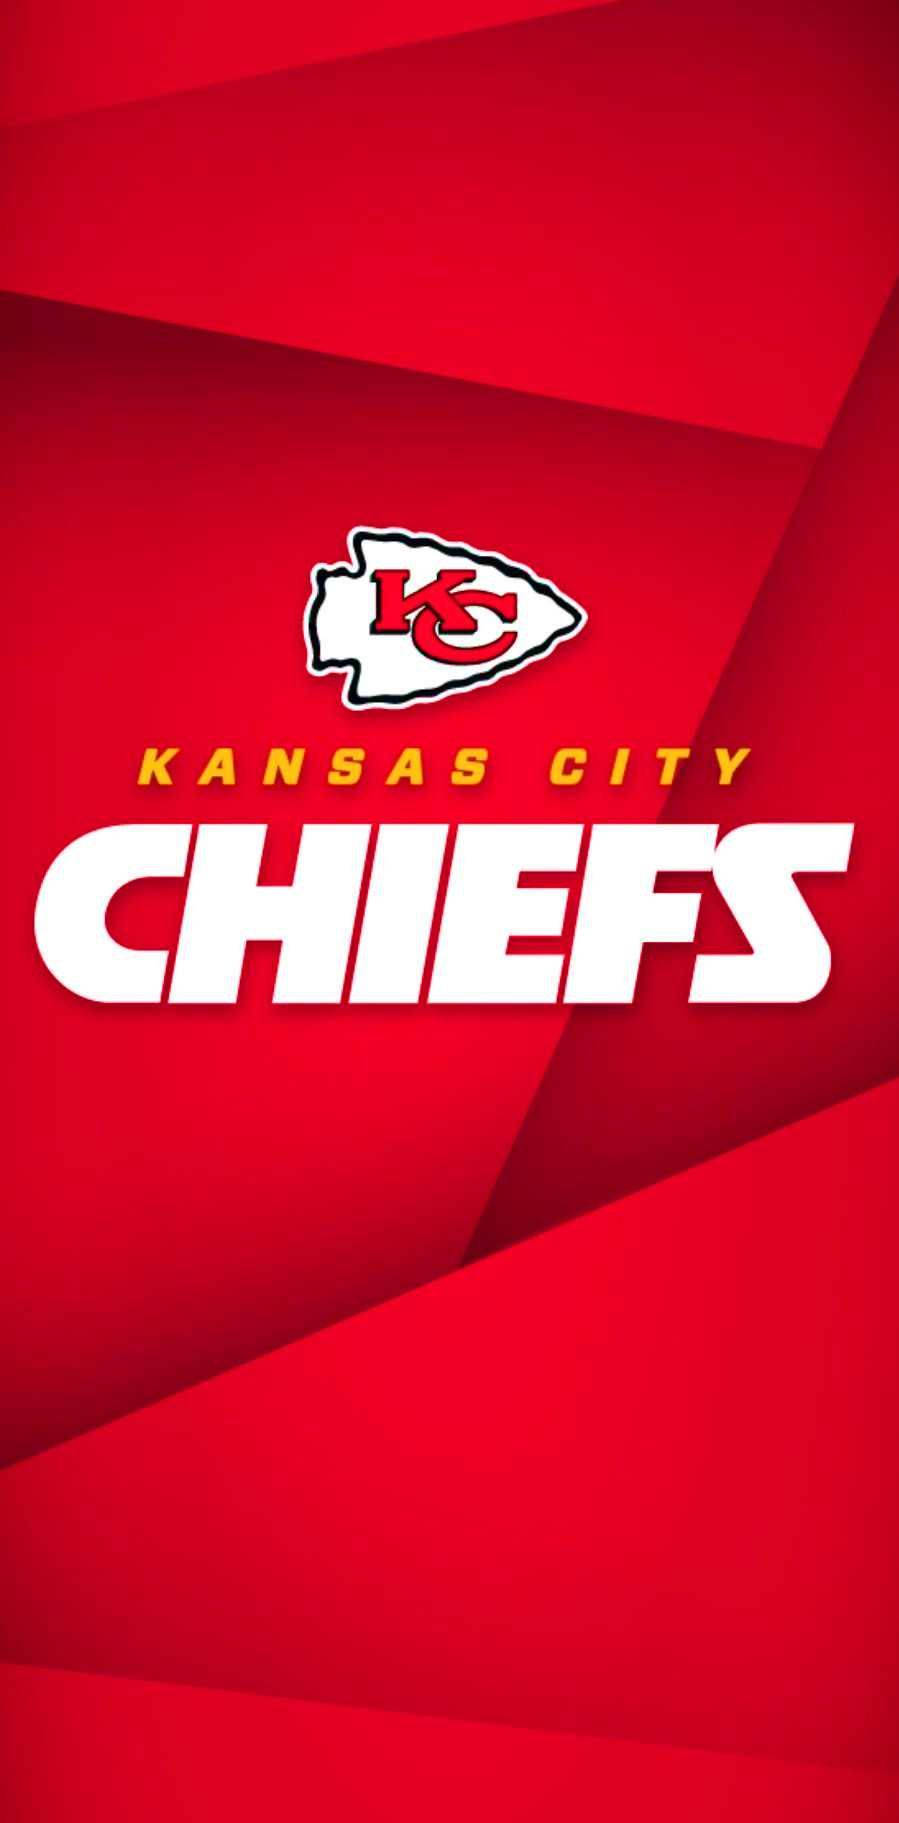 One of the most iconic logos in the NFL, the Kansas City Chiefs are cool! Wallpaper